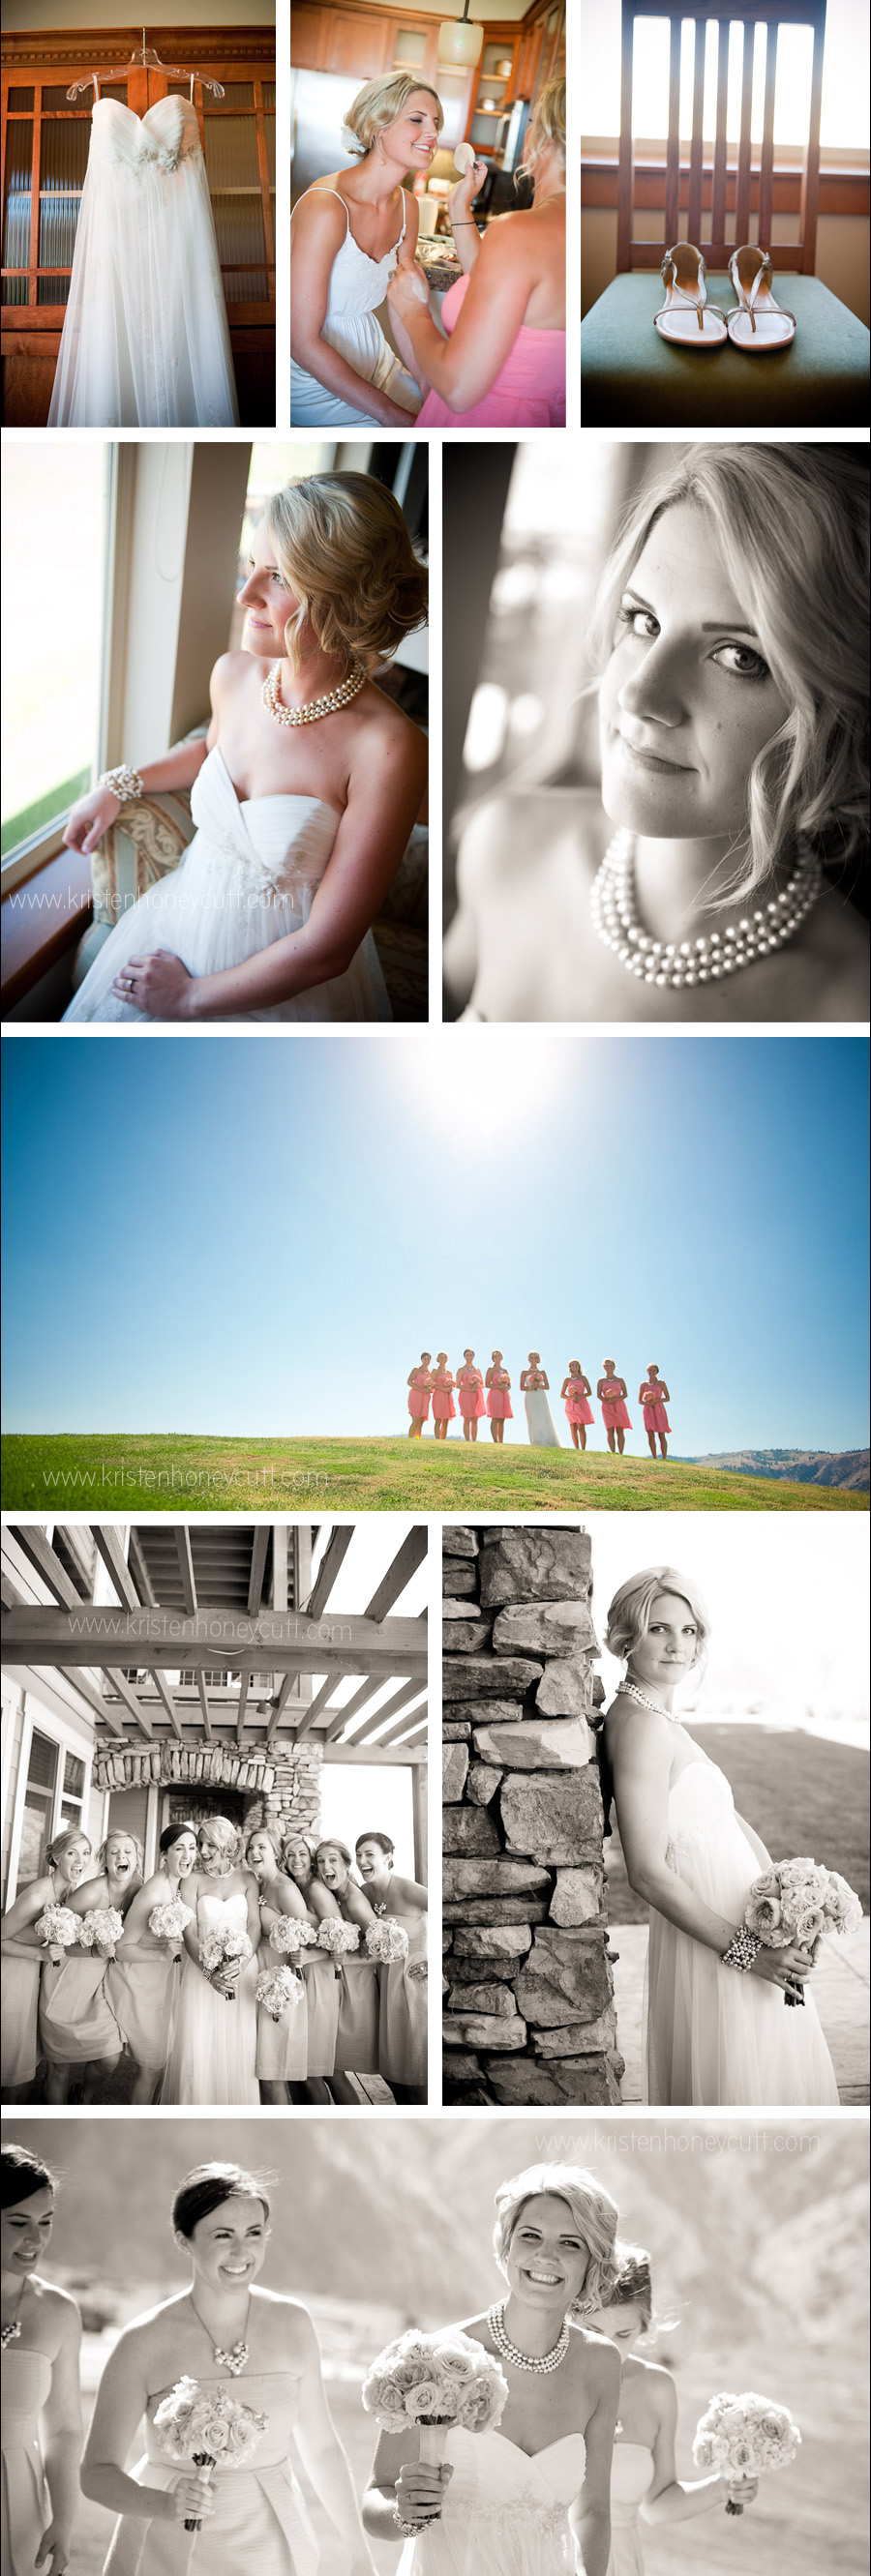 Bride and bridesmaids are photographed by Kristen Honeycutt Photographer